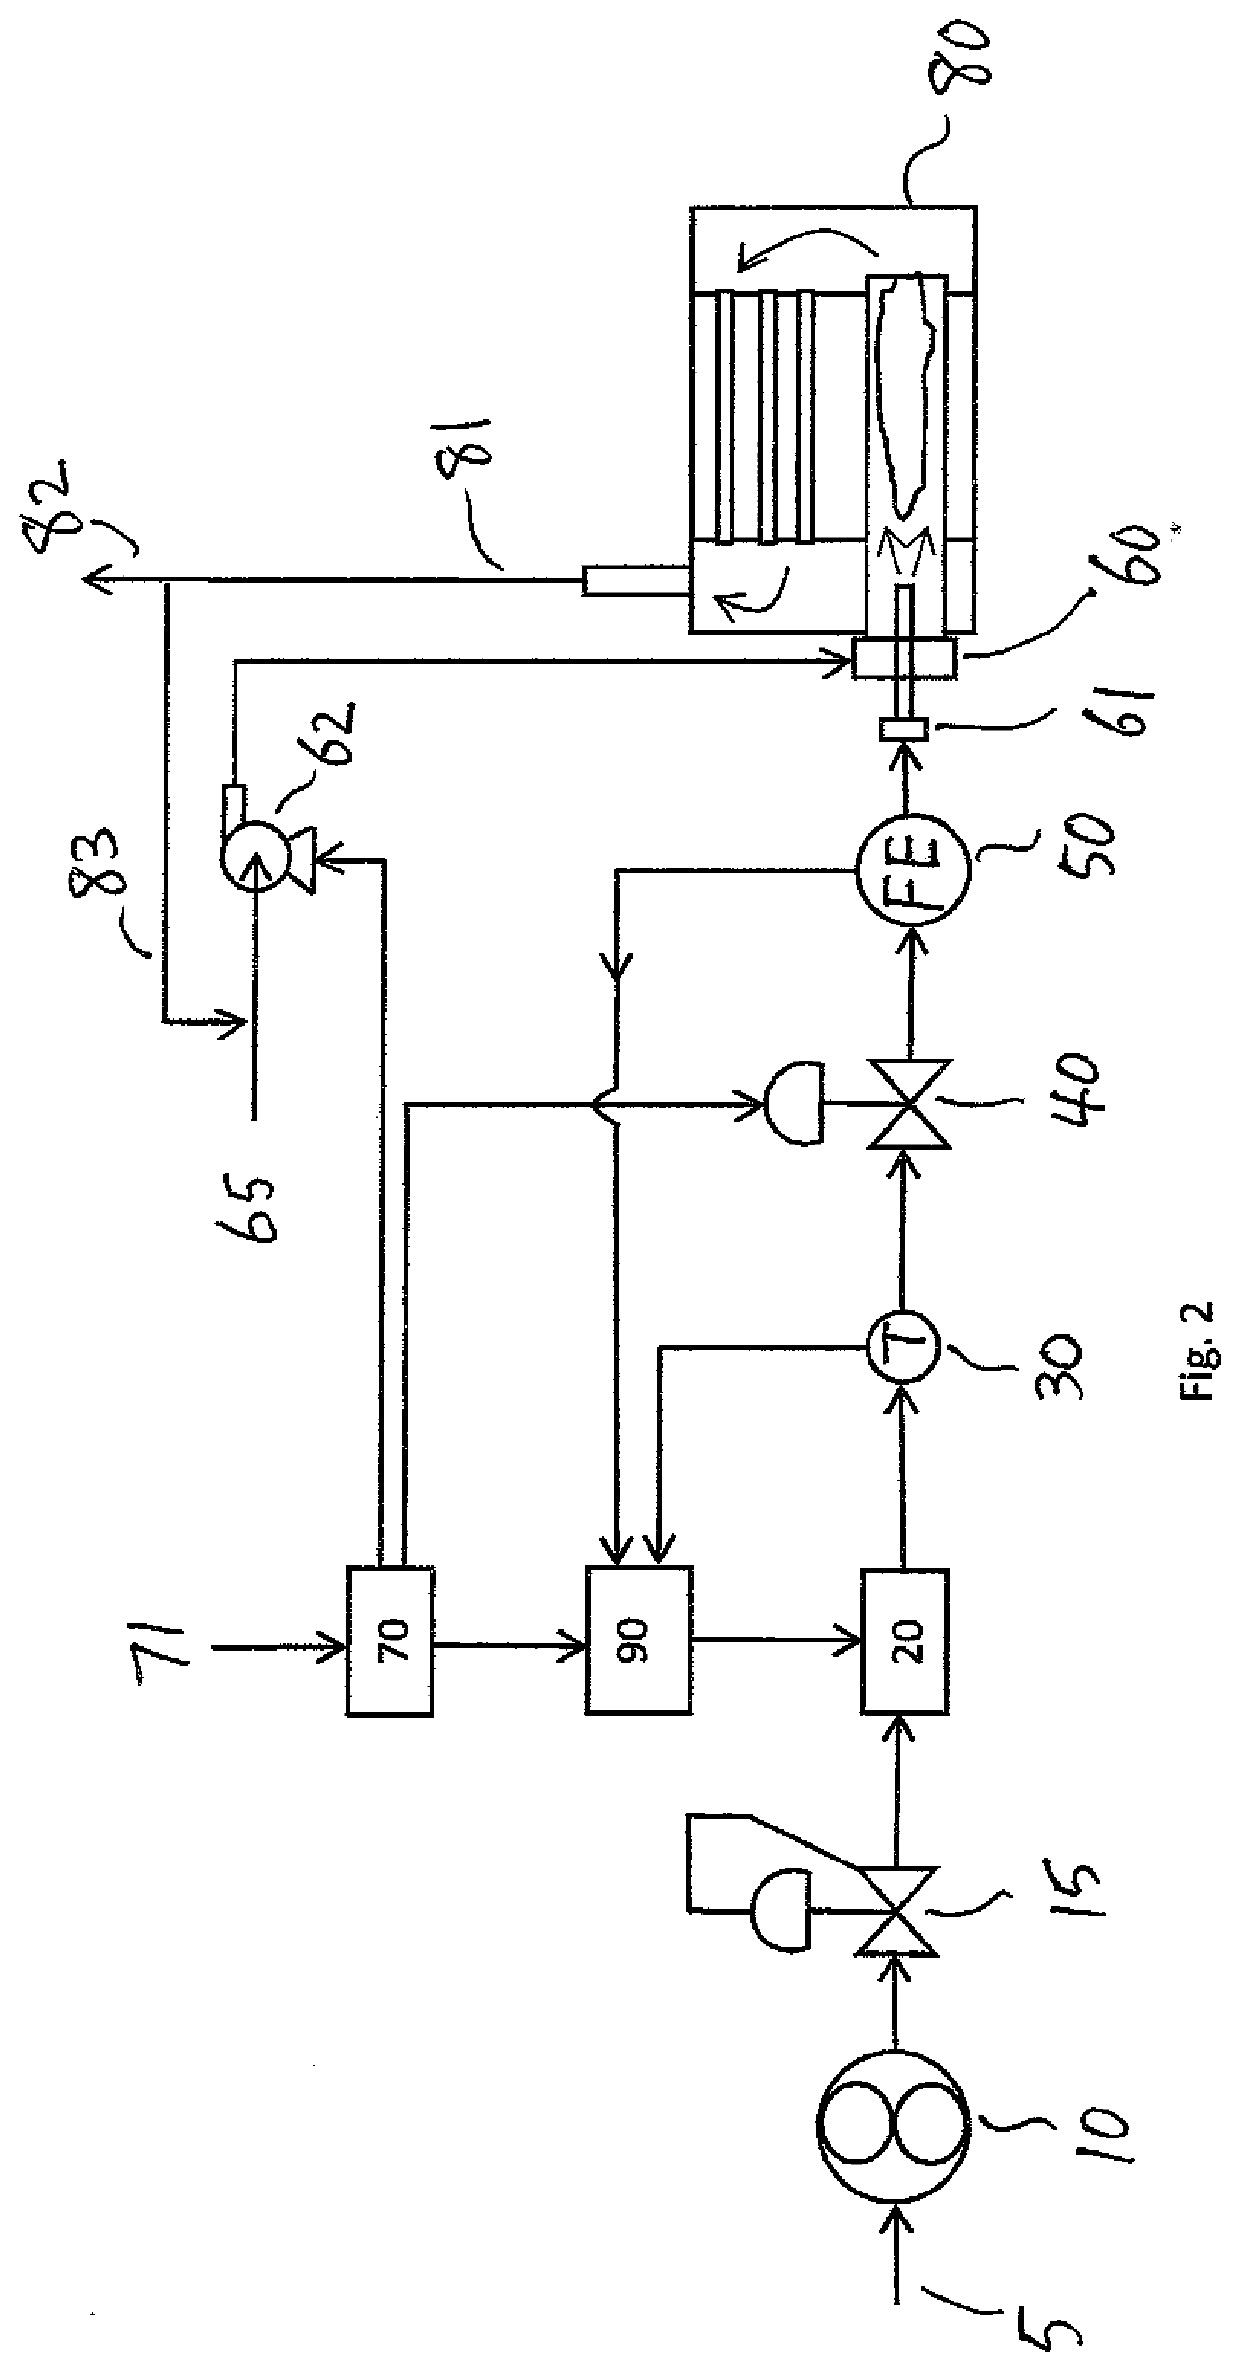 Apparatus for Oil Flow Control